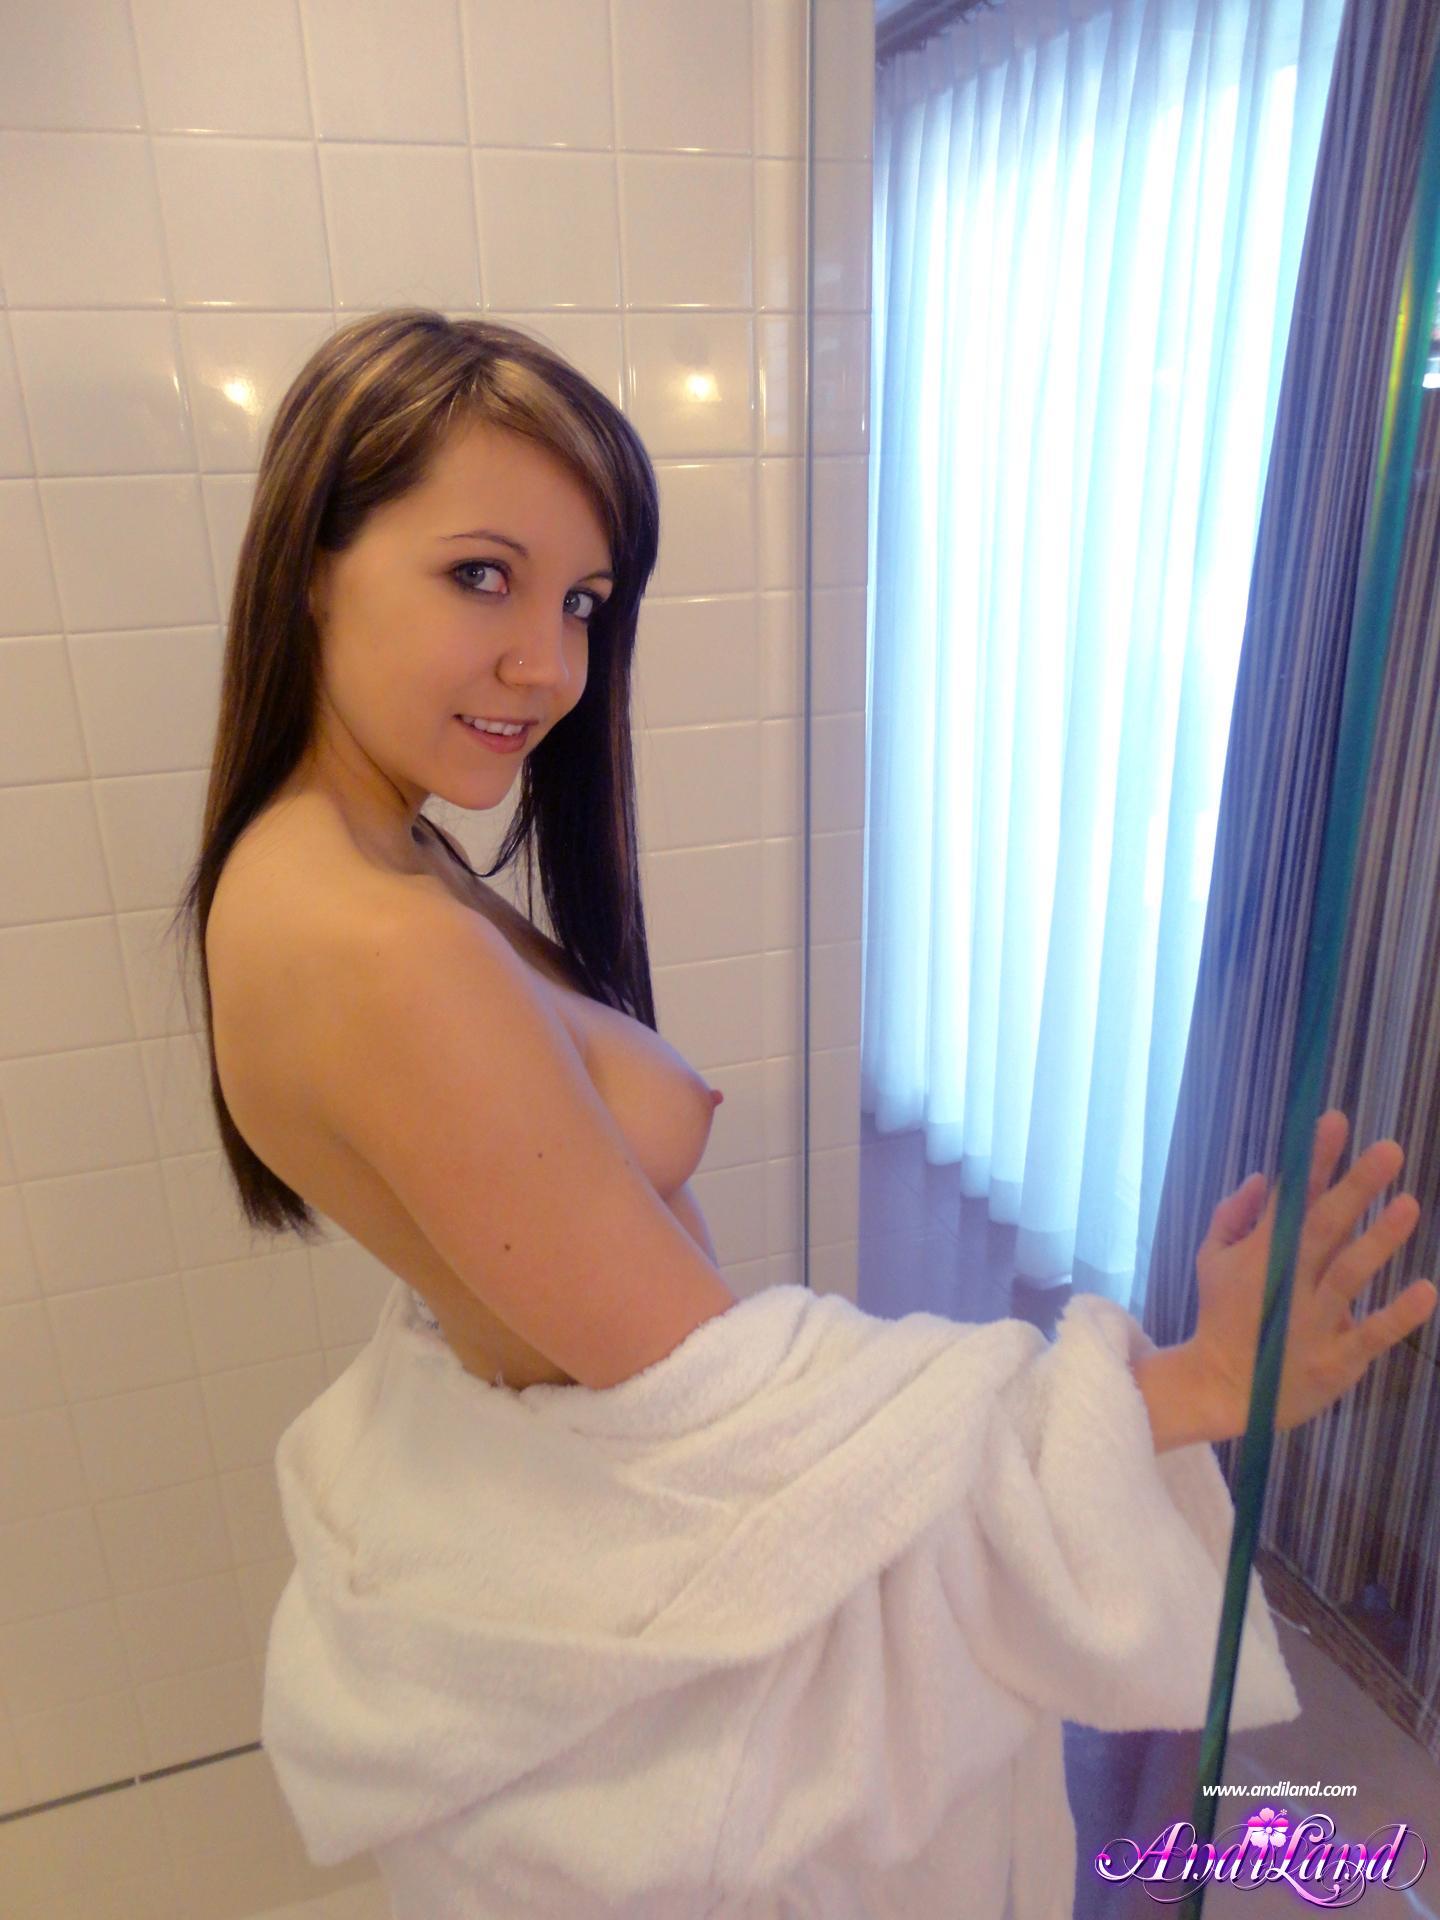 Hot teen girl Andi Land wants you to join her in the shower #53139823